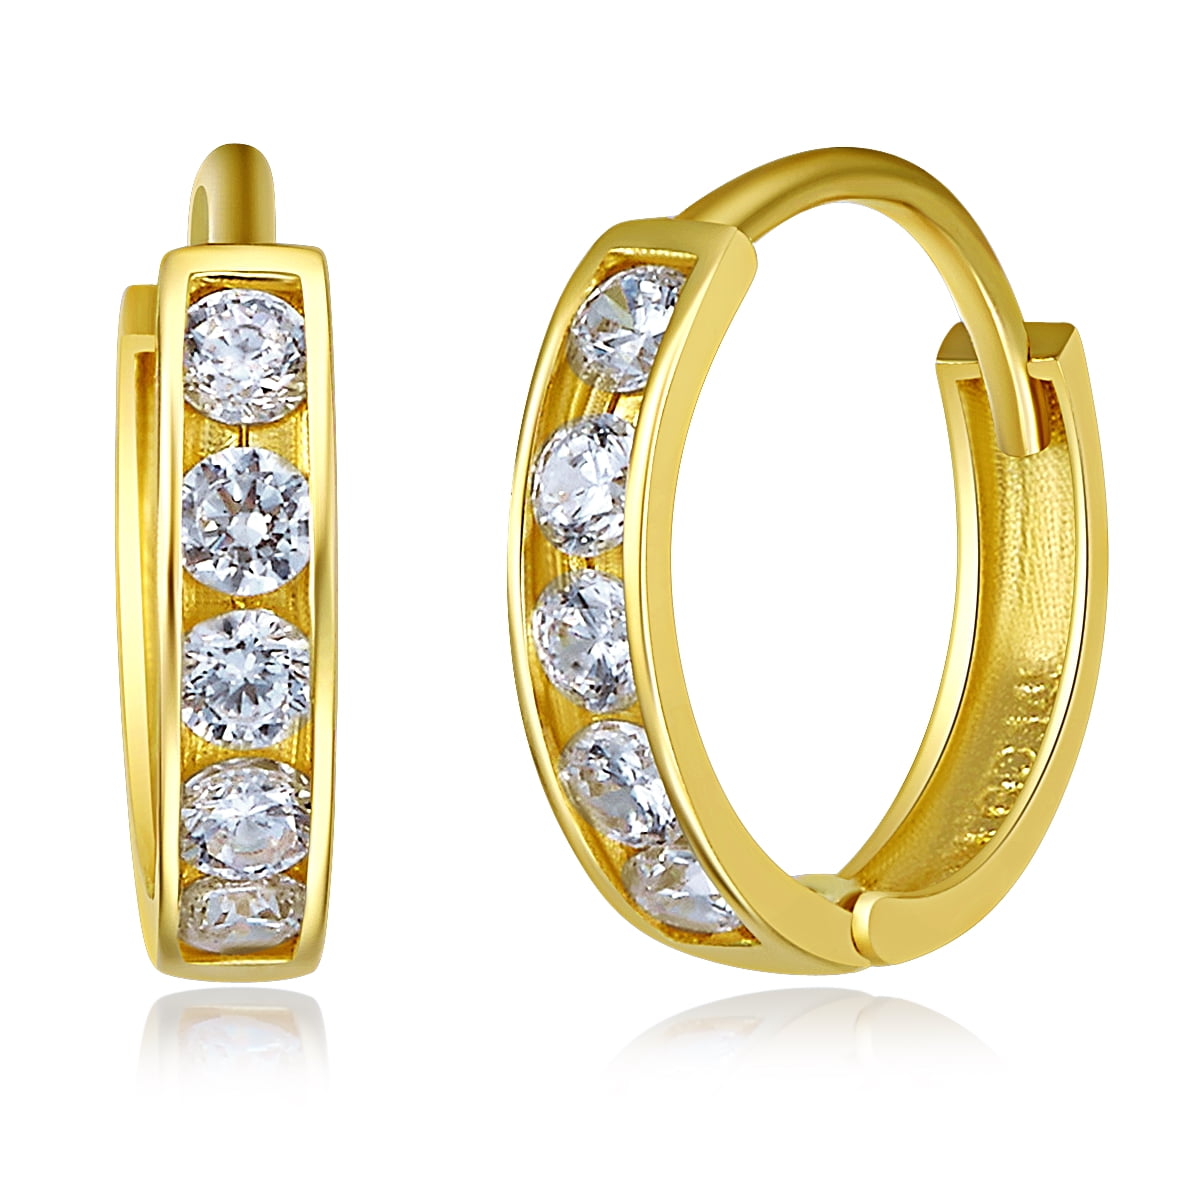 3 Different Size Available 14k REAL Yellow Gold 5mm Thickness CZ Channel Set Hoop Huggie Earrings